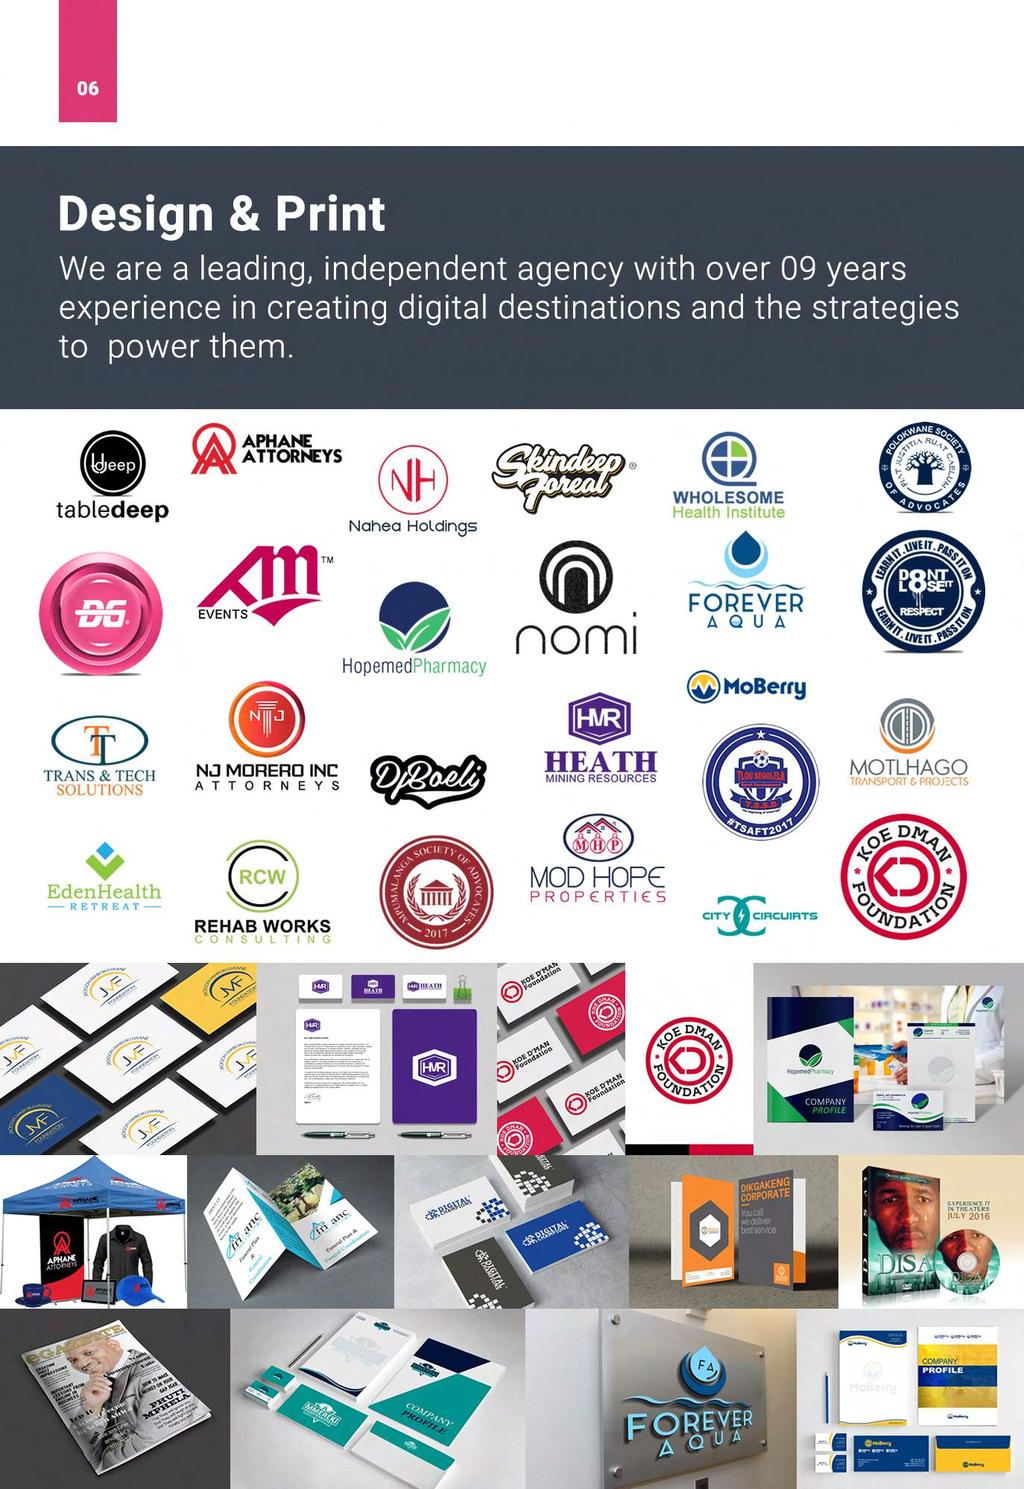 06 Design & Print We are a leading, independent agency with over 09 years